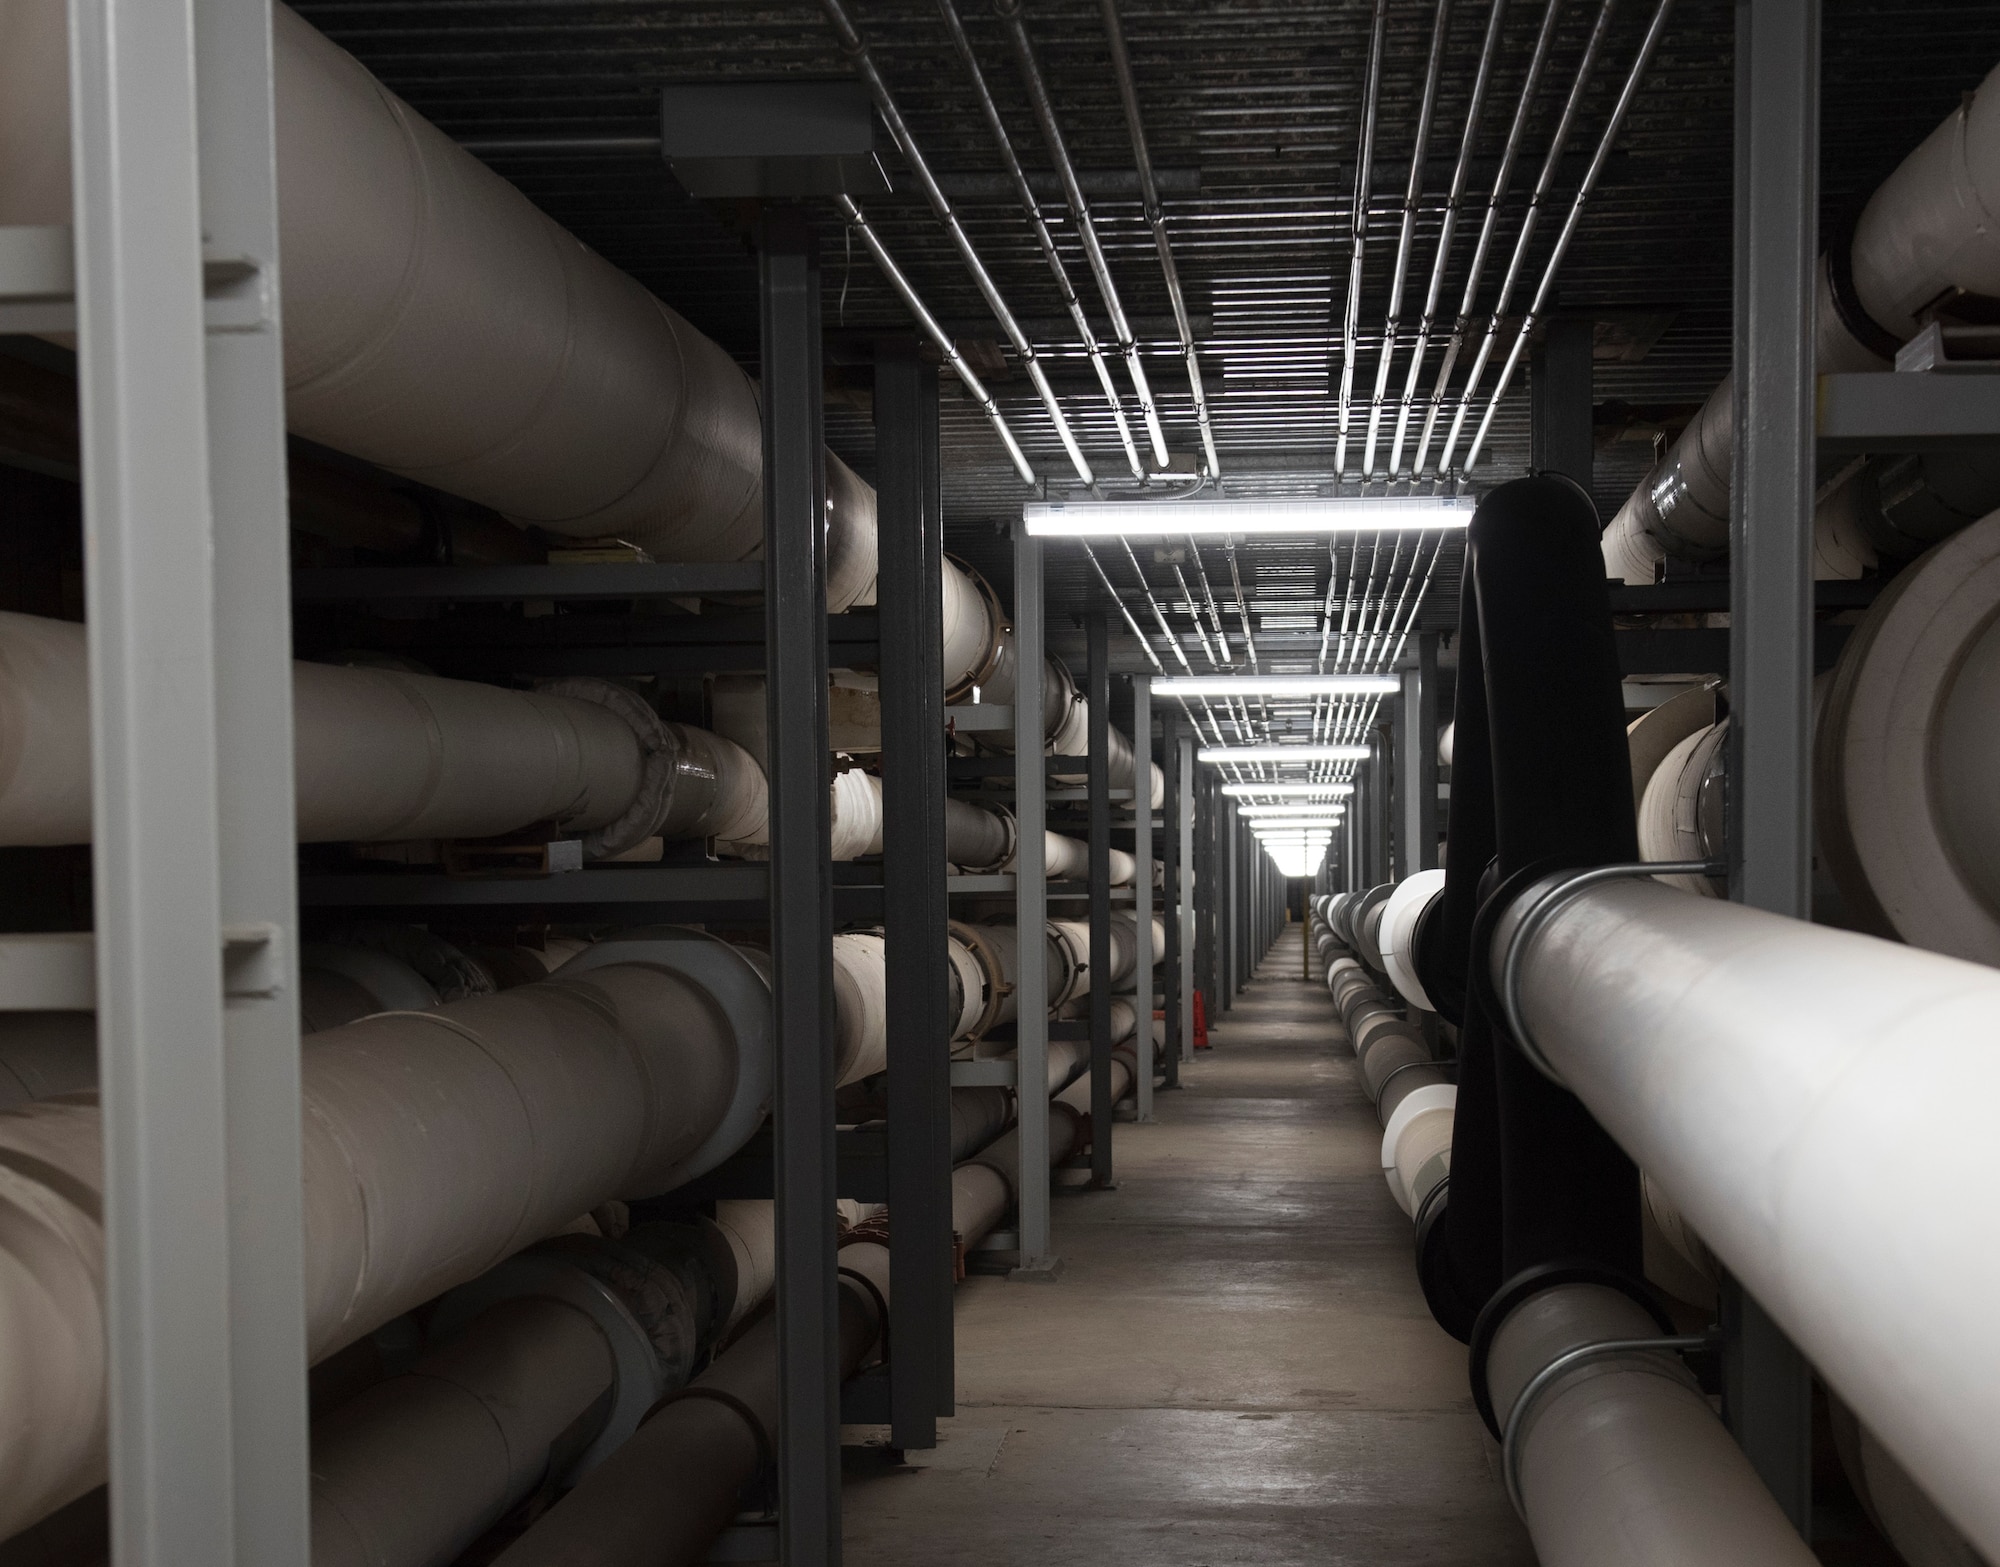 Pipes housing water and other utilities run the length of the David Grant USAF Medical Center basement at Travis Air Force Base, California, June 14, 2019. All of the pipes are stabilized by seismic bracing to ensure the hospital would still be able to function in the event of an earthquake. (U.S. Air Force photo by Staff Sgt. Amber Carter)